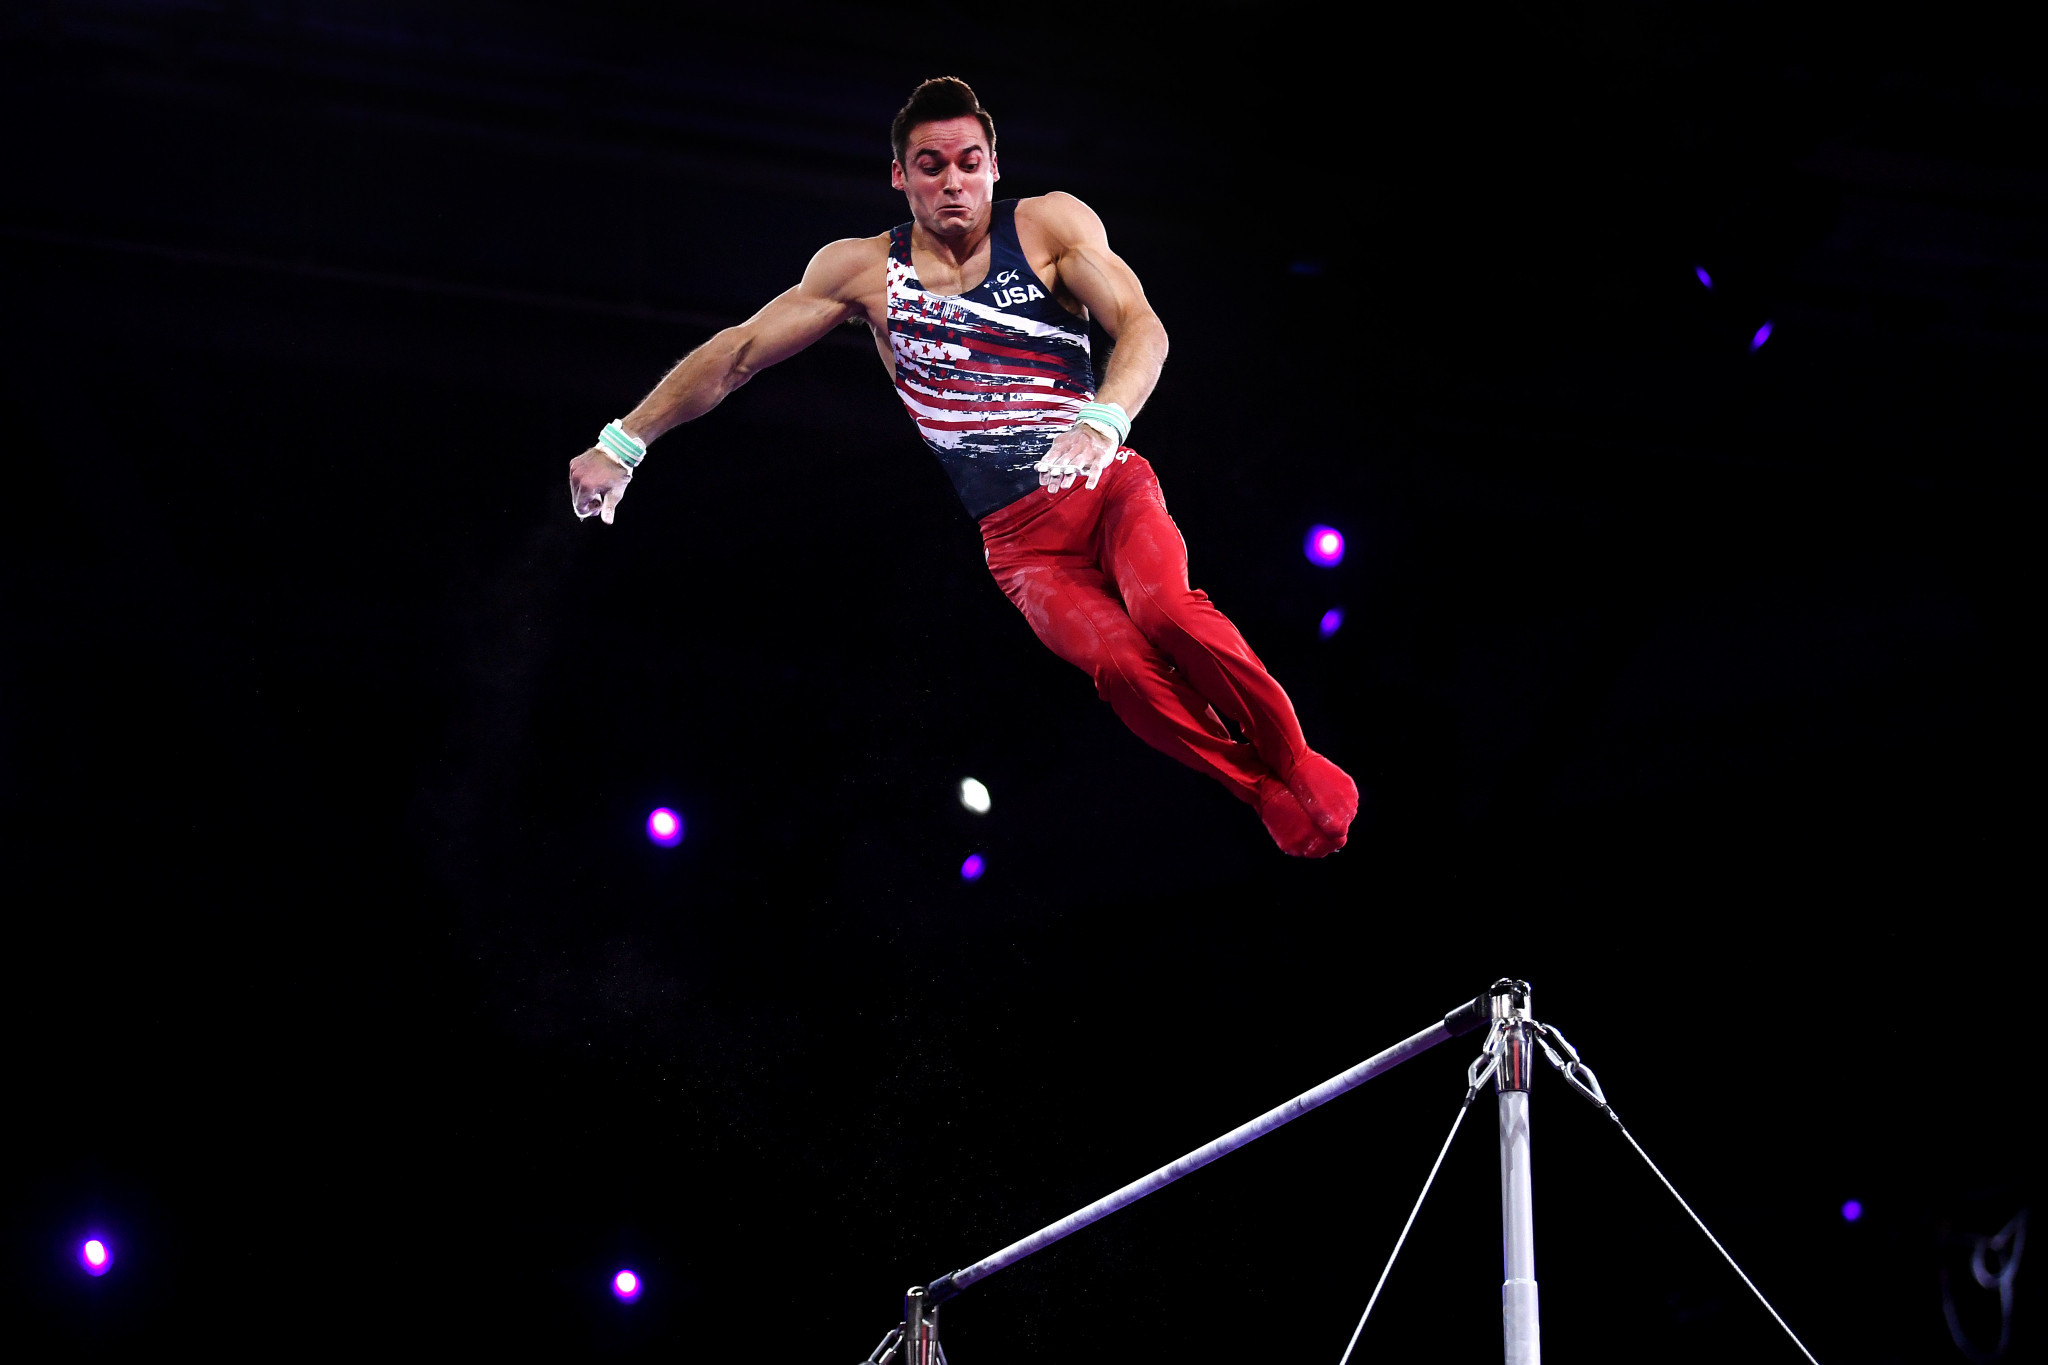 USA Gymnastics announce new dates for Olympic team trials in 2021